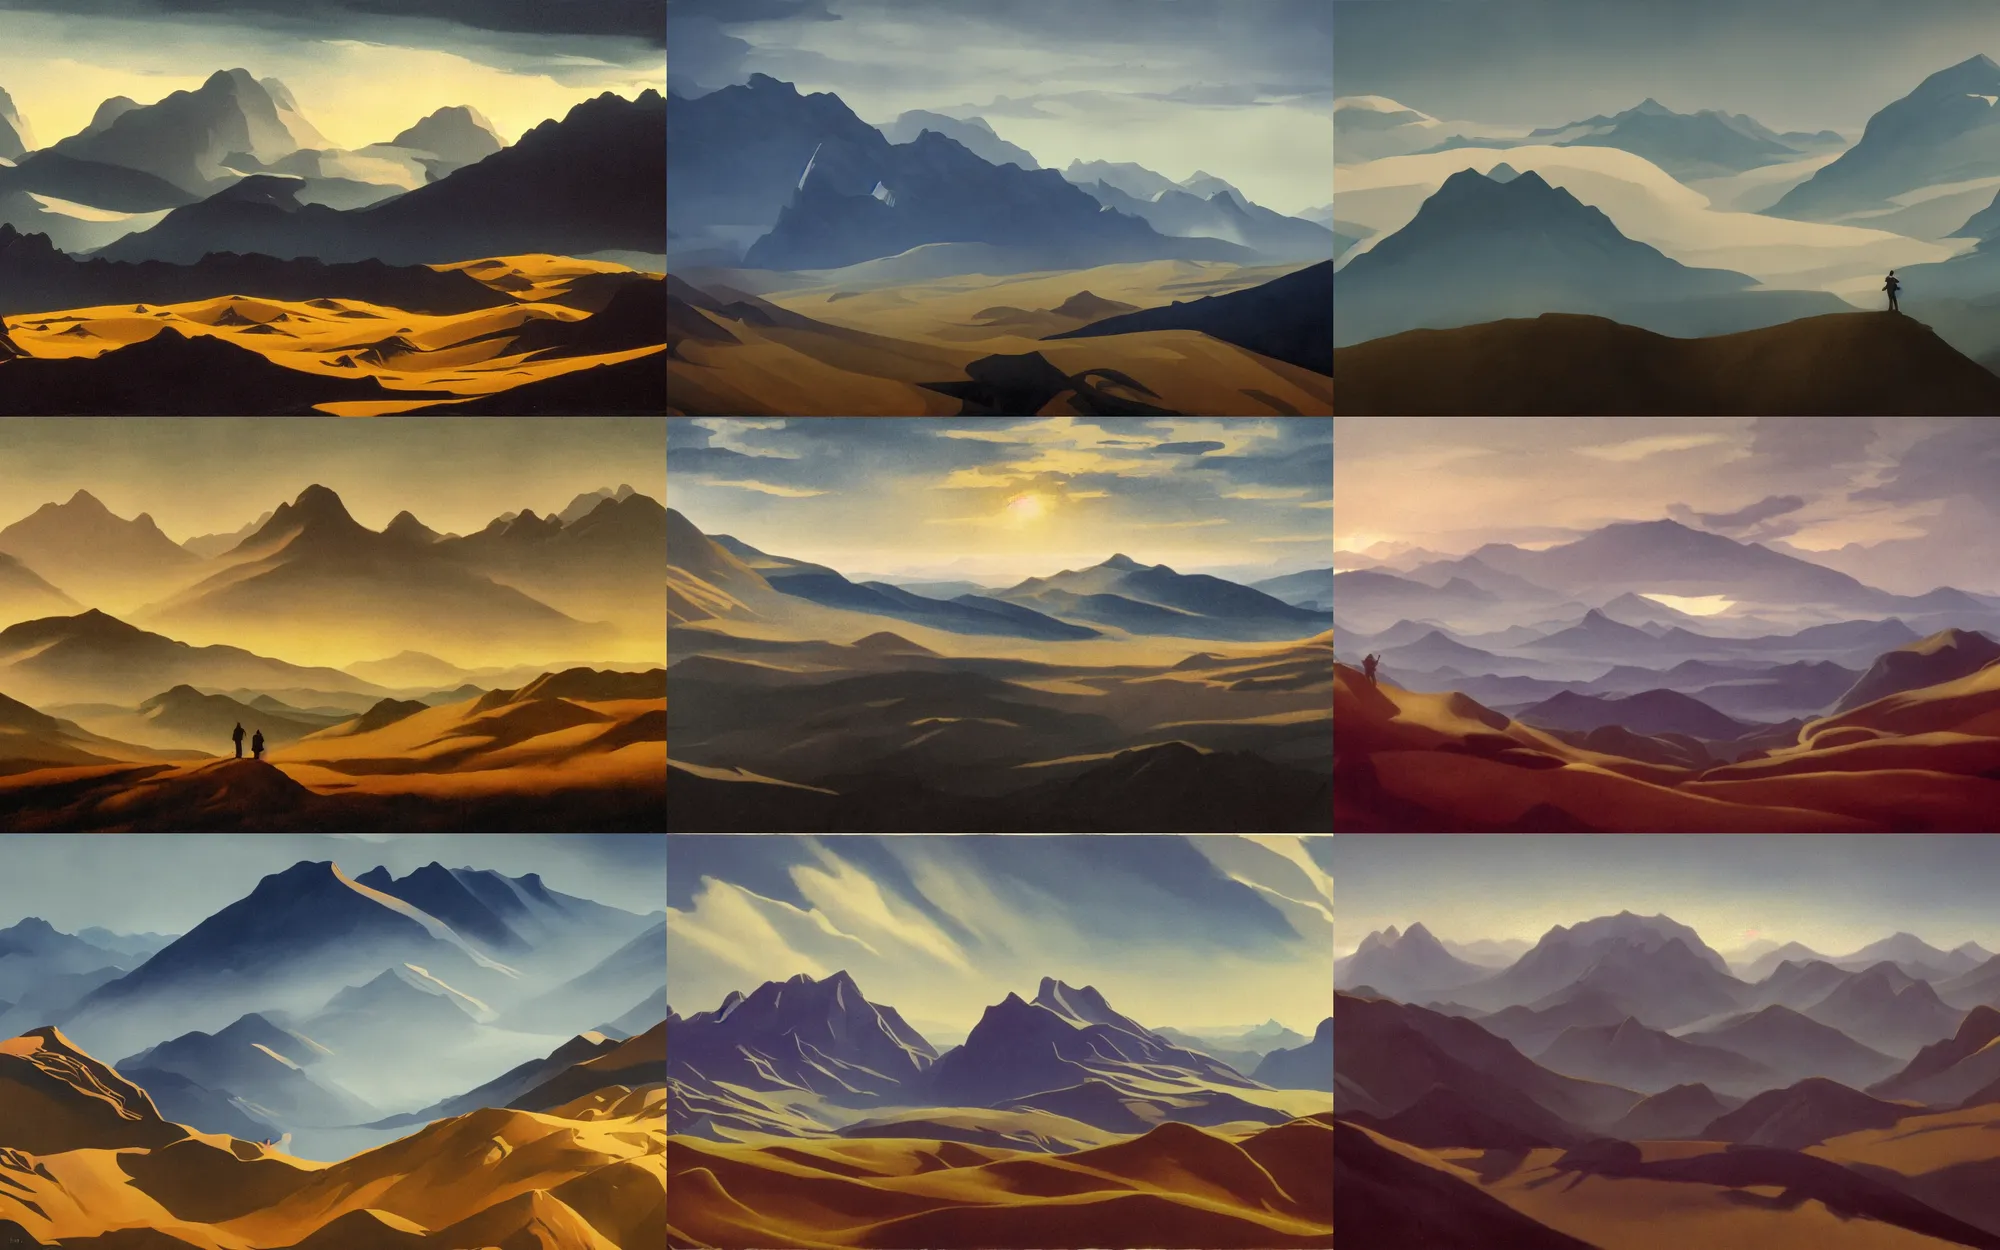 Prompt: epic composition, hills and mountains between clouds, shot from danis villeneuve movie, roger deakins filming, nightfall, painting in the style of ed mell and william turner